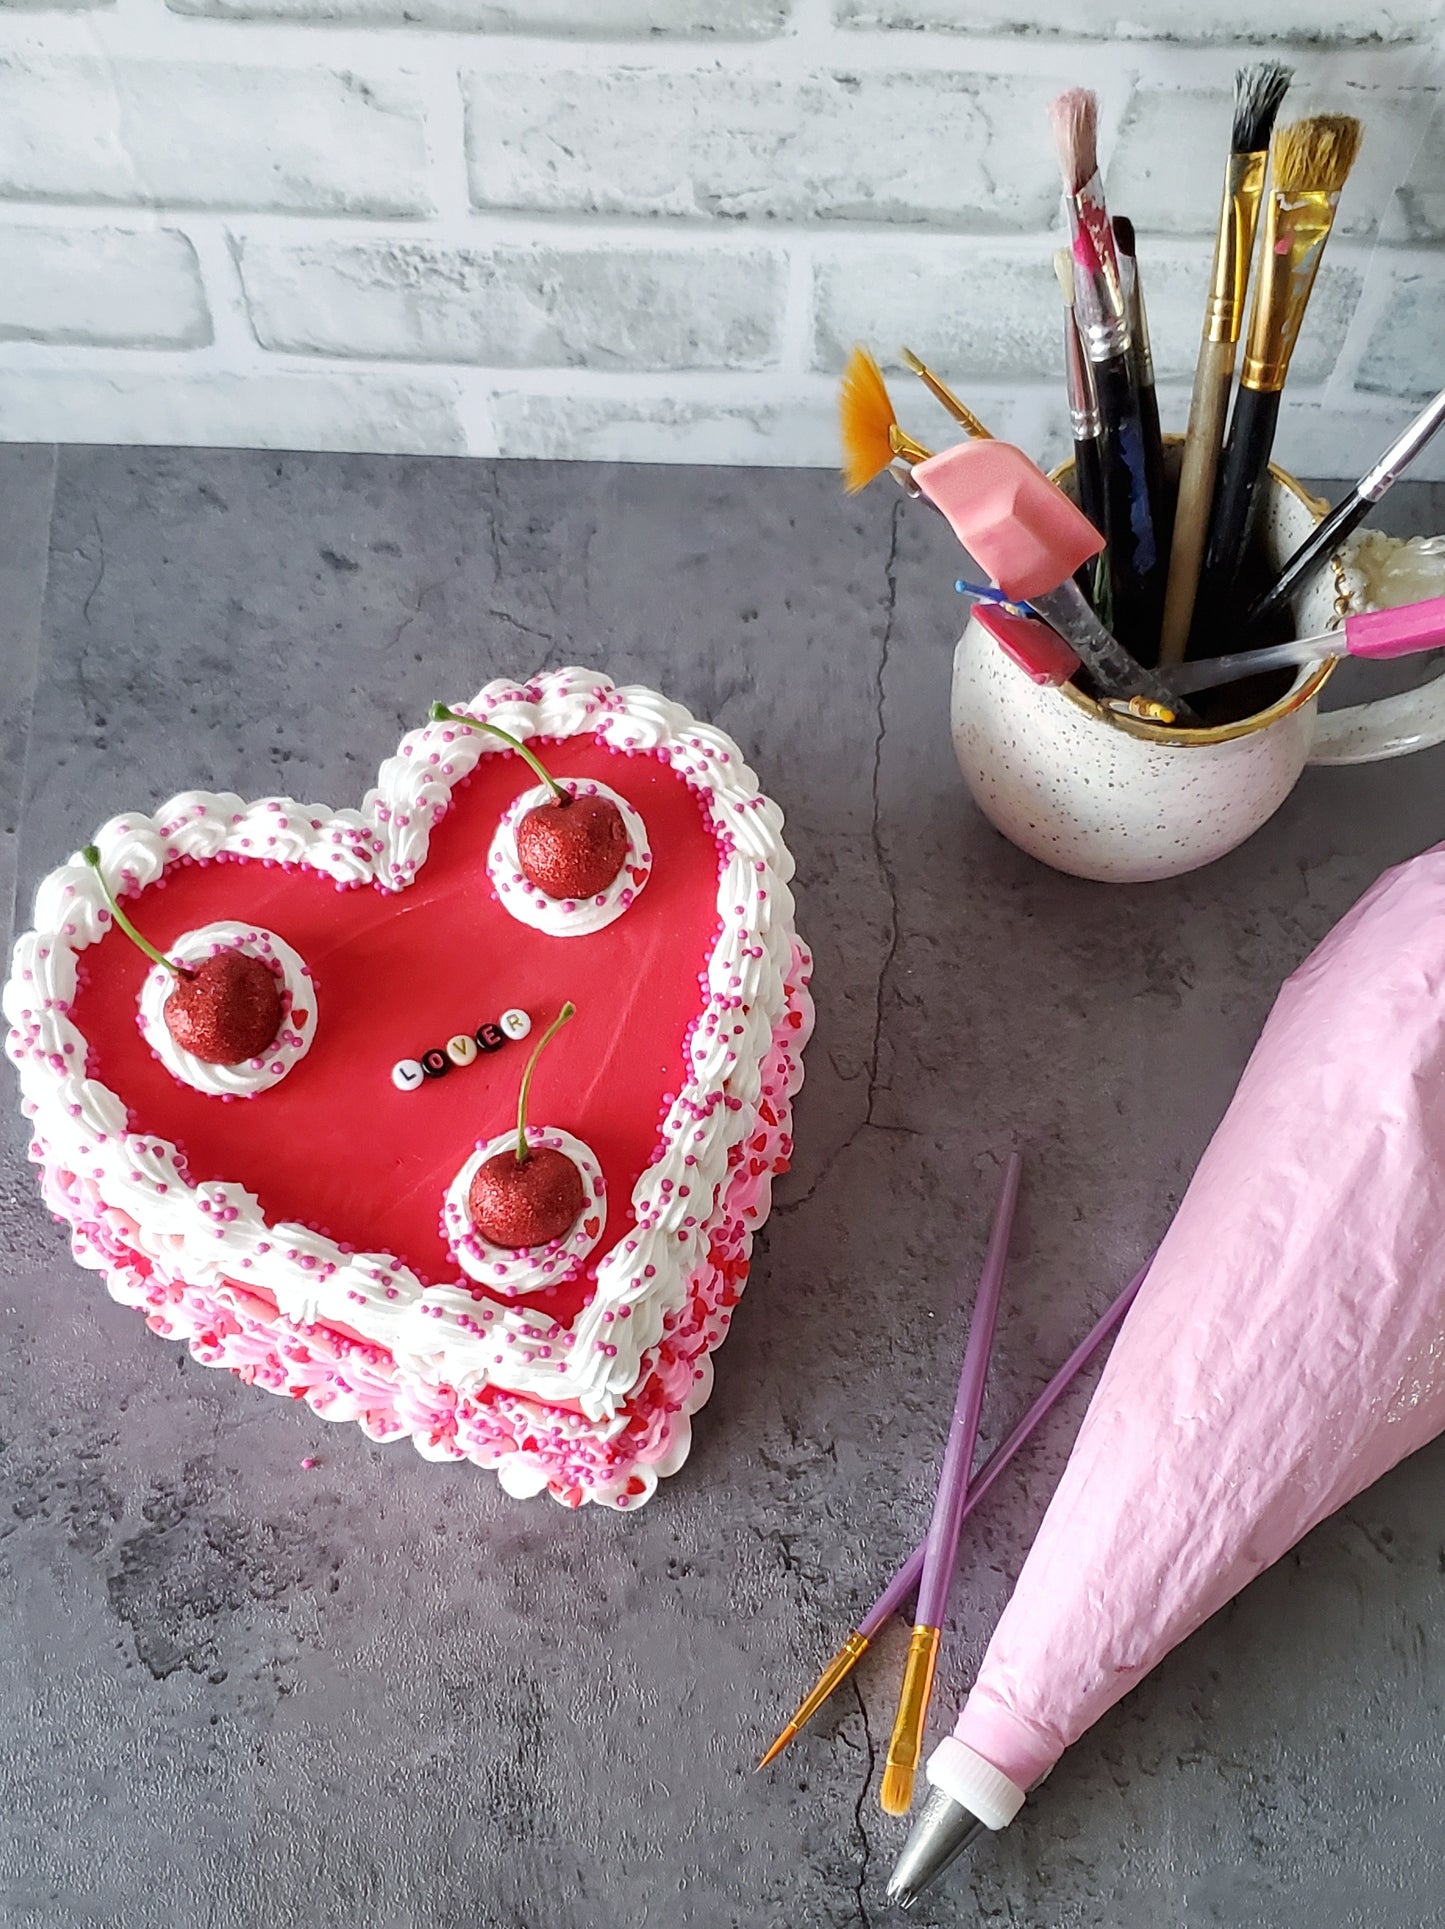 Buttercream Cake Sculpture SET OF TWO Red Hearts